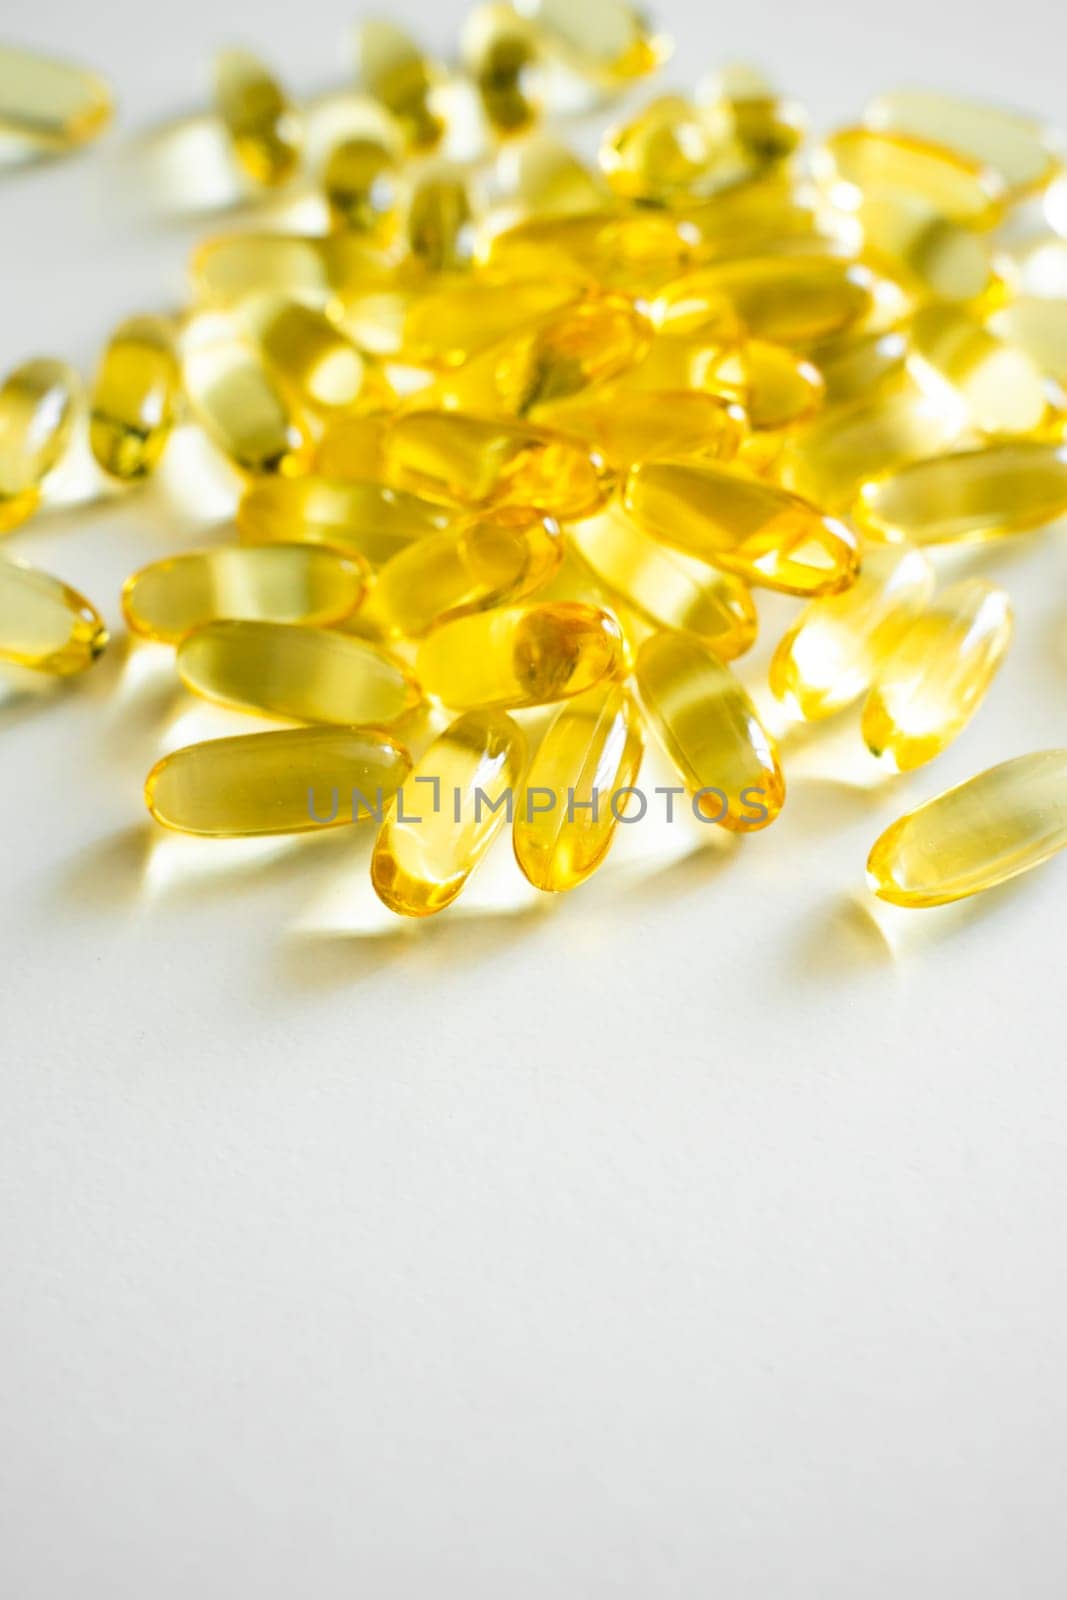 Close up cod liver oil omega 3 gel capsules. Fish oil capsules with omega 3 on white background